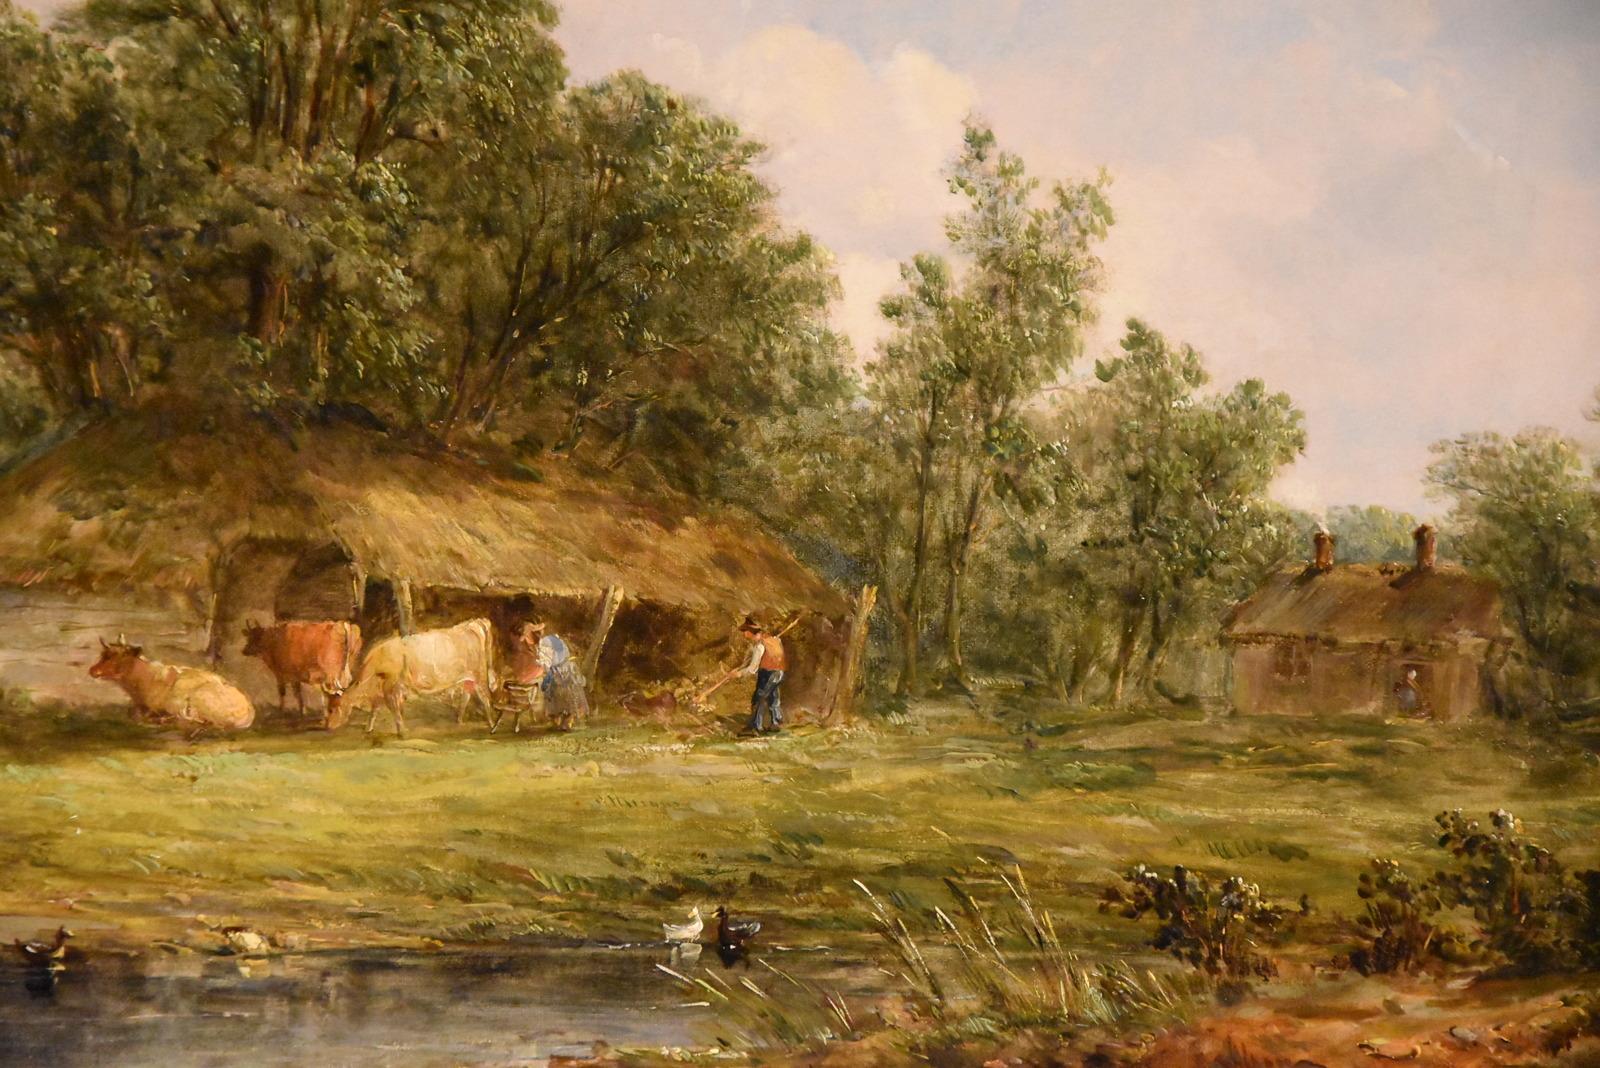 Oil painting by Alfred Vickers senior “The Cattle Byre”. Alfred Vickers 1786 -1868. Fine self taught landscape painter, a regular exhibitor at the Royal society and British Institution where he had 125 works shown. Oil on canvas. Signed and dated